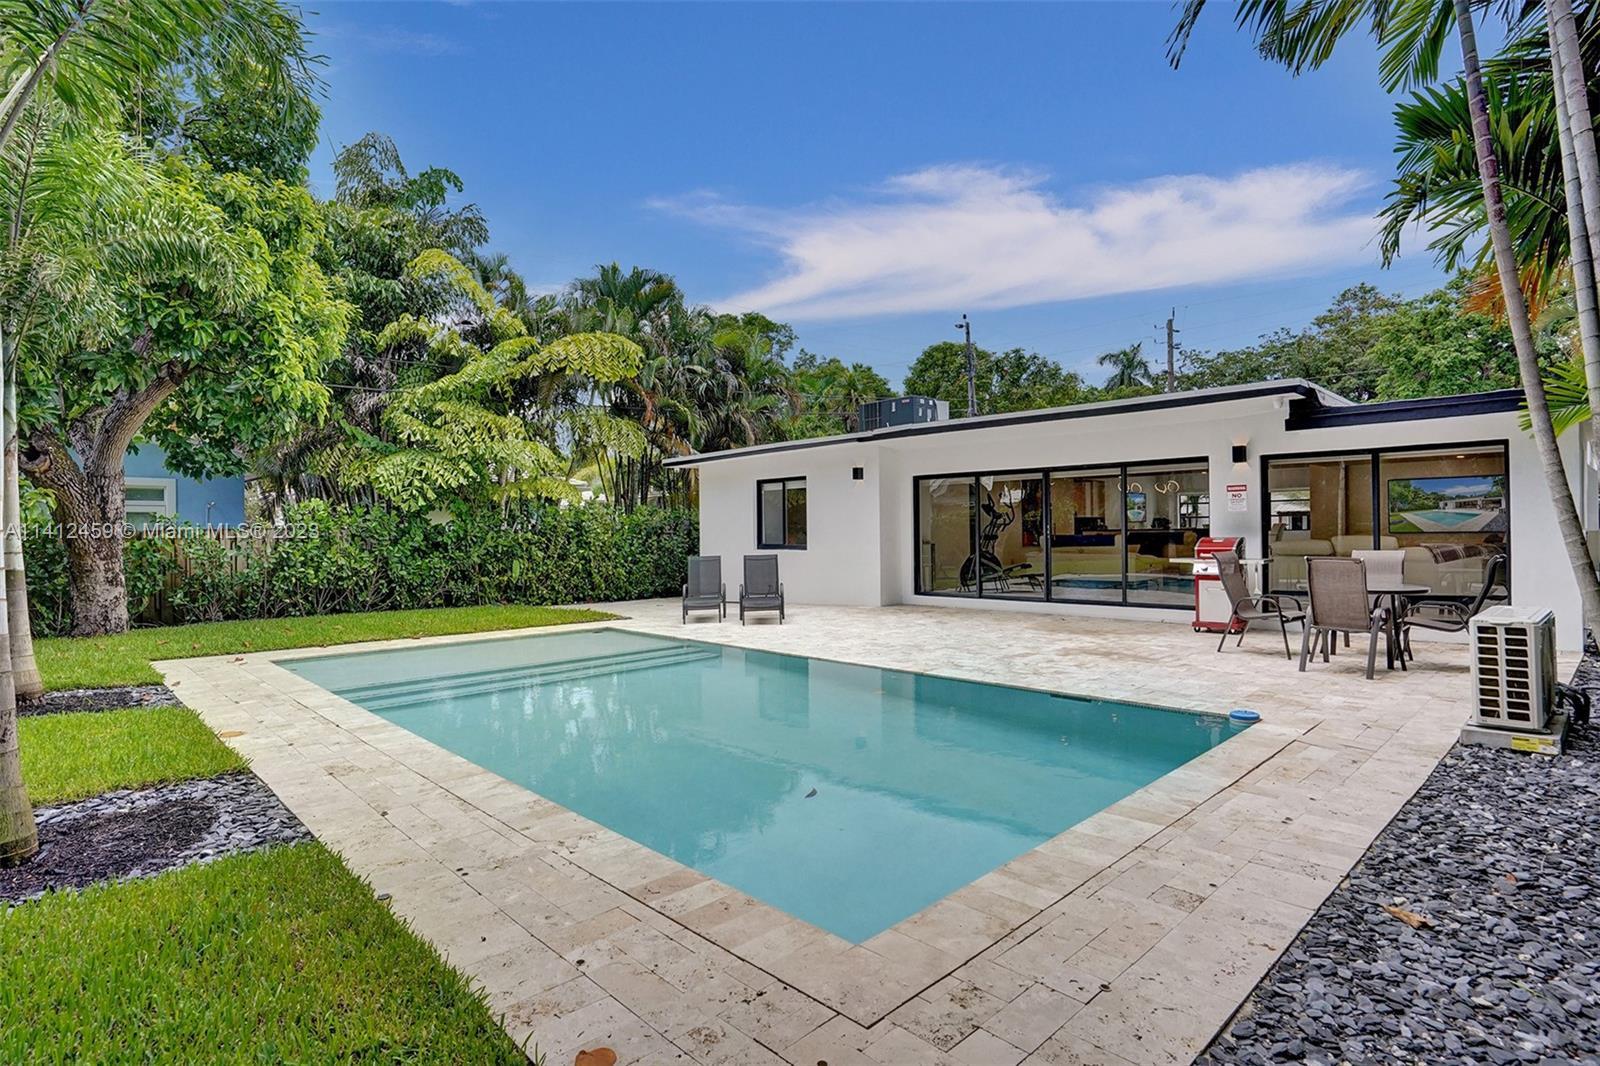 Photo of 1624 NE 7th St in Fort Lauderdale, FL